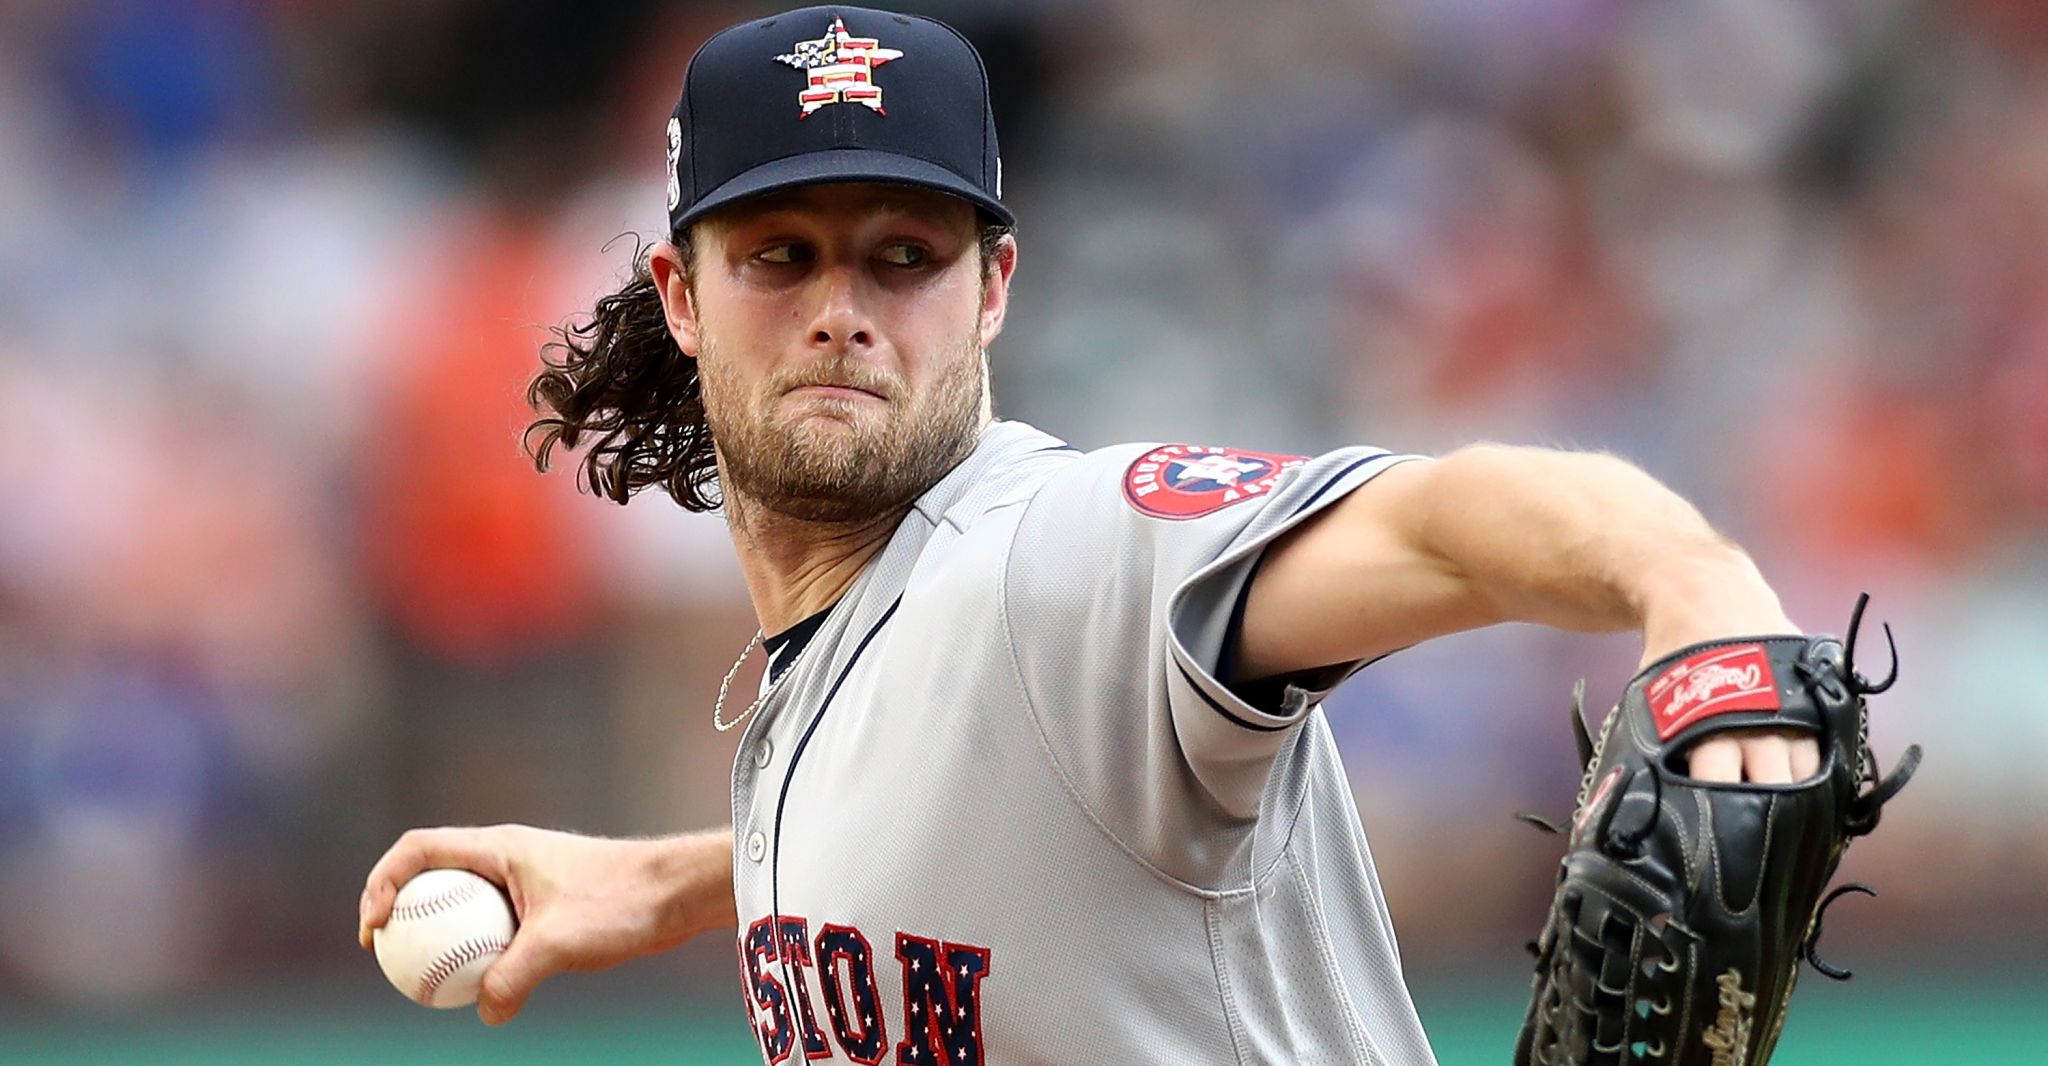 Astros Balls & Strikes: Gerrit Cole finishes strong